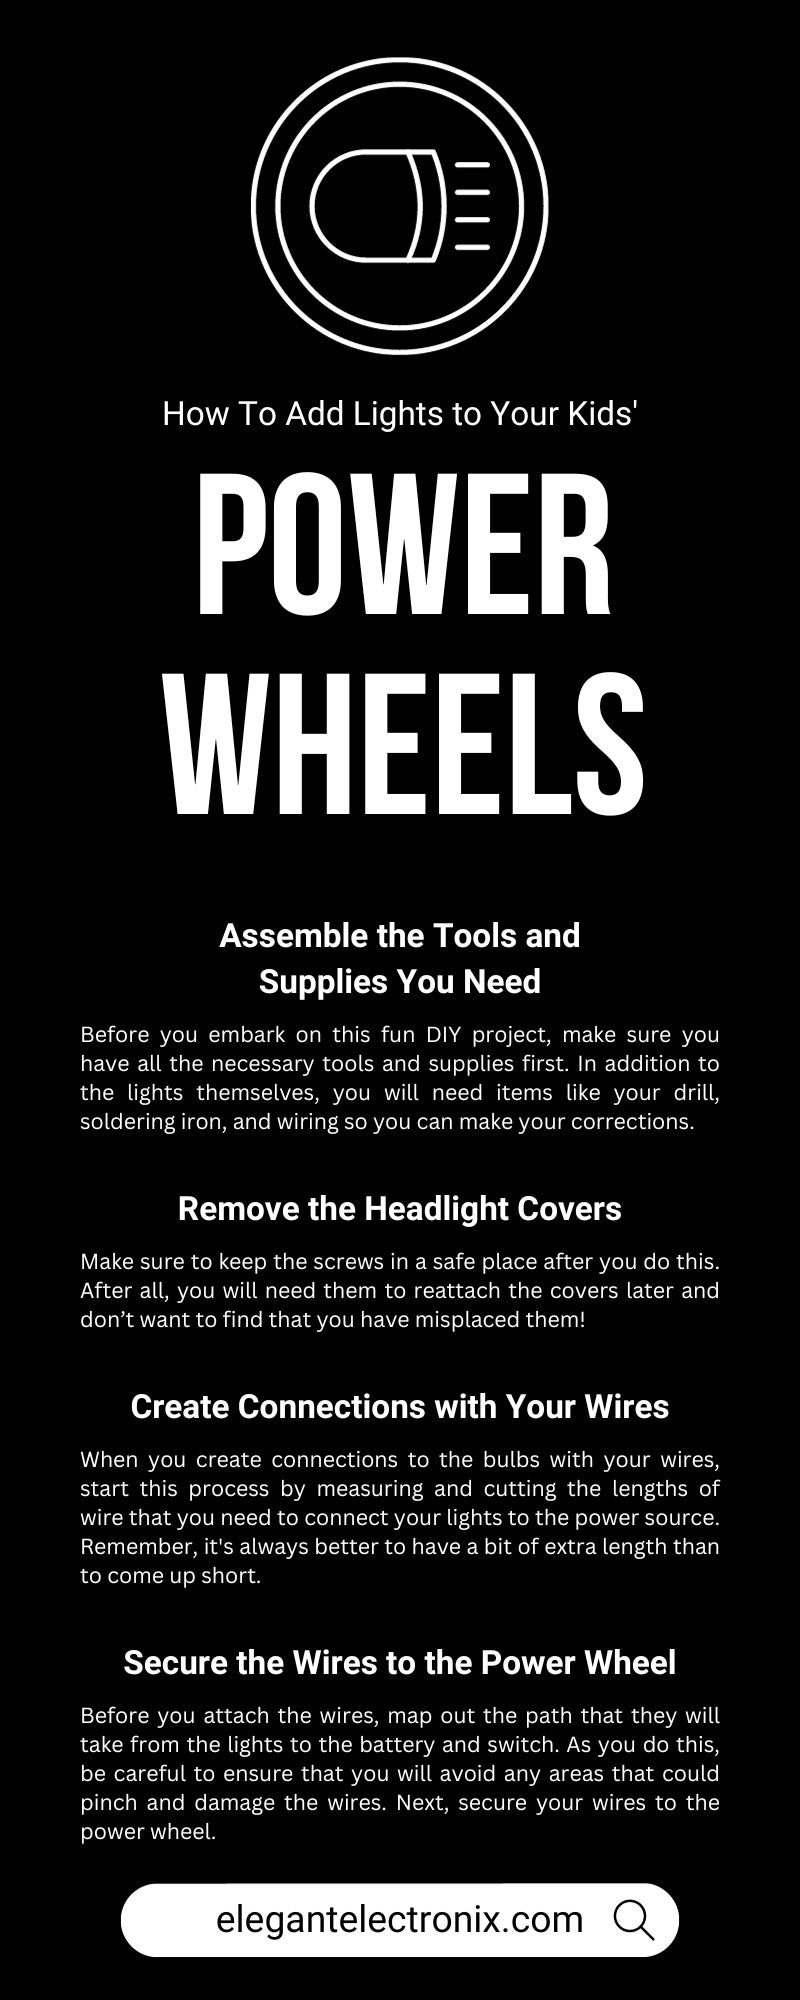 How To Add Lights to Your Kids' Power Wheels